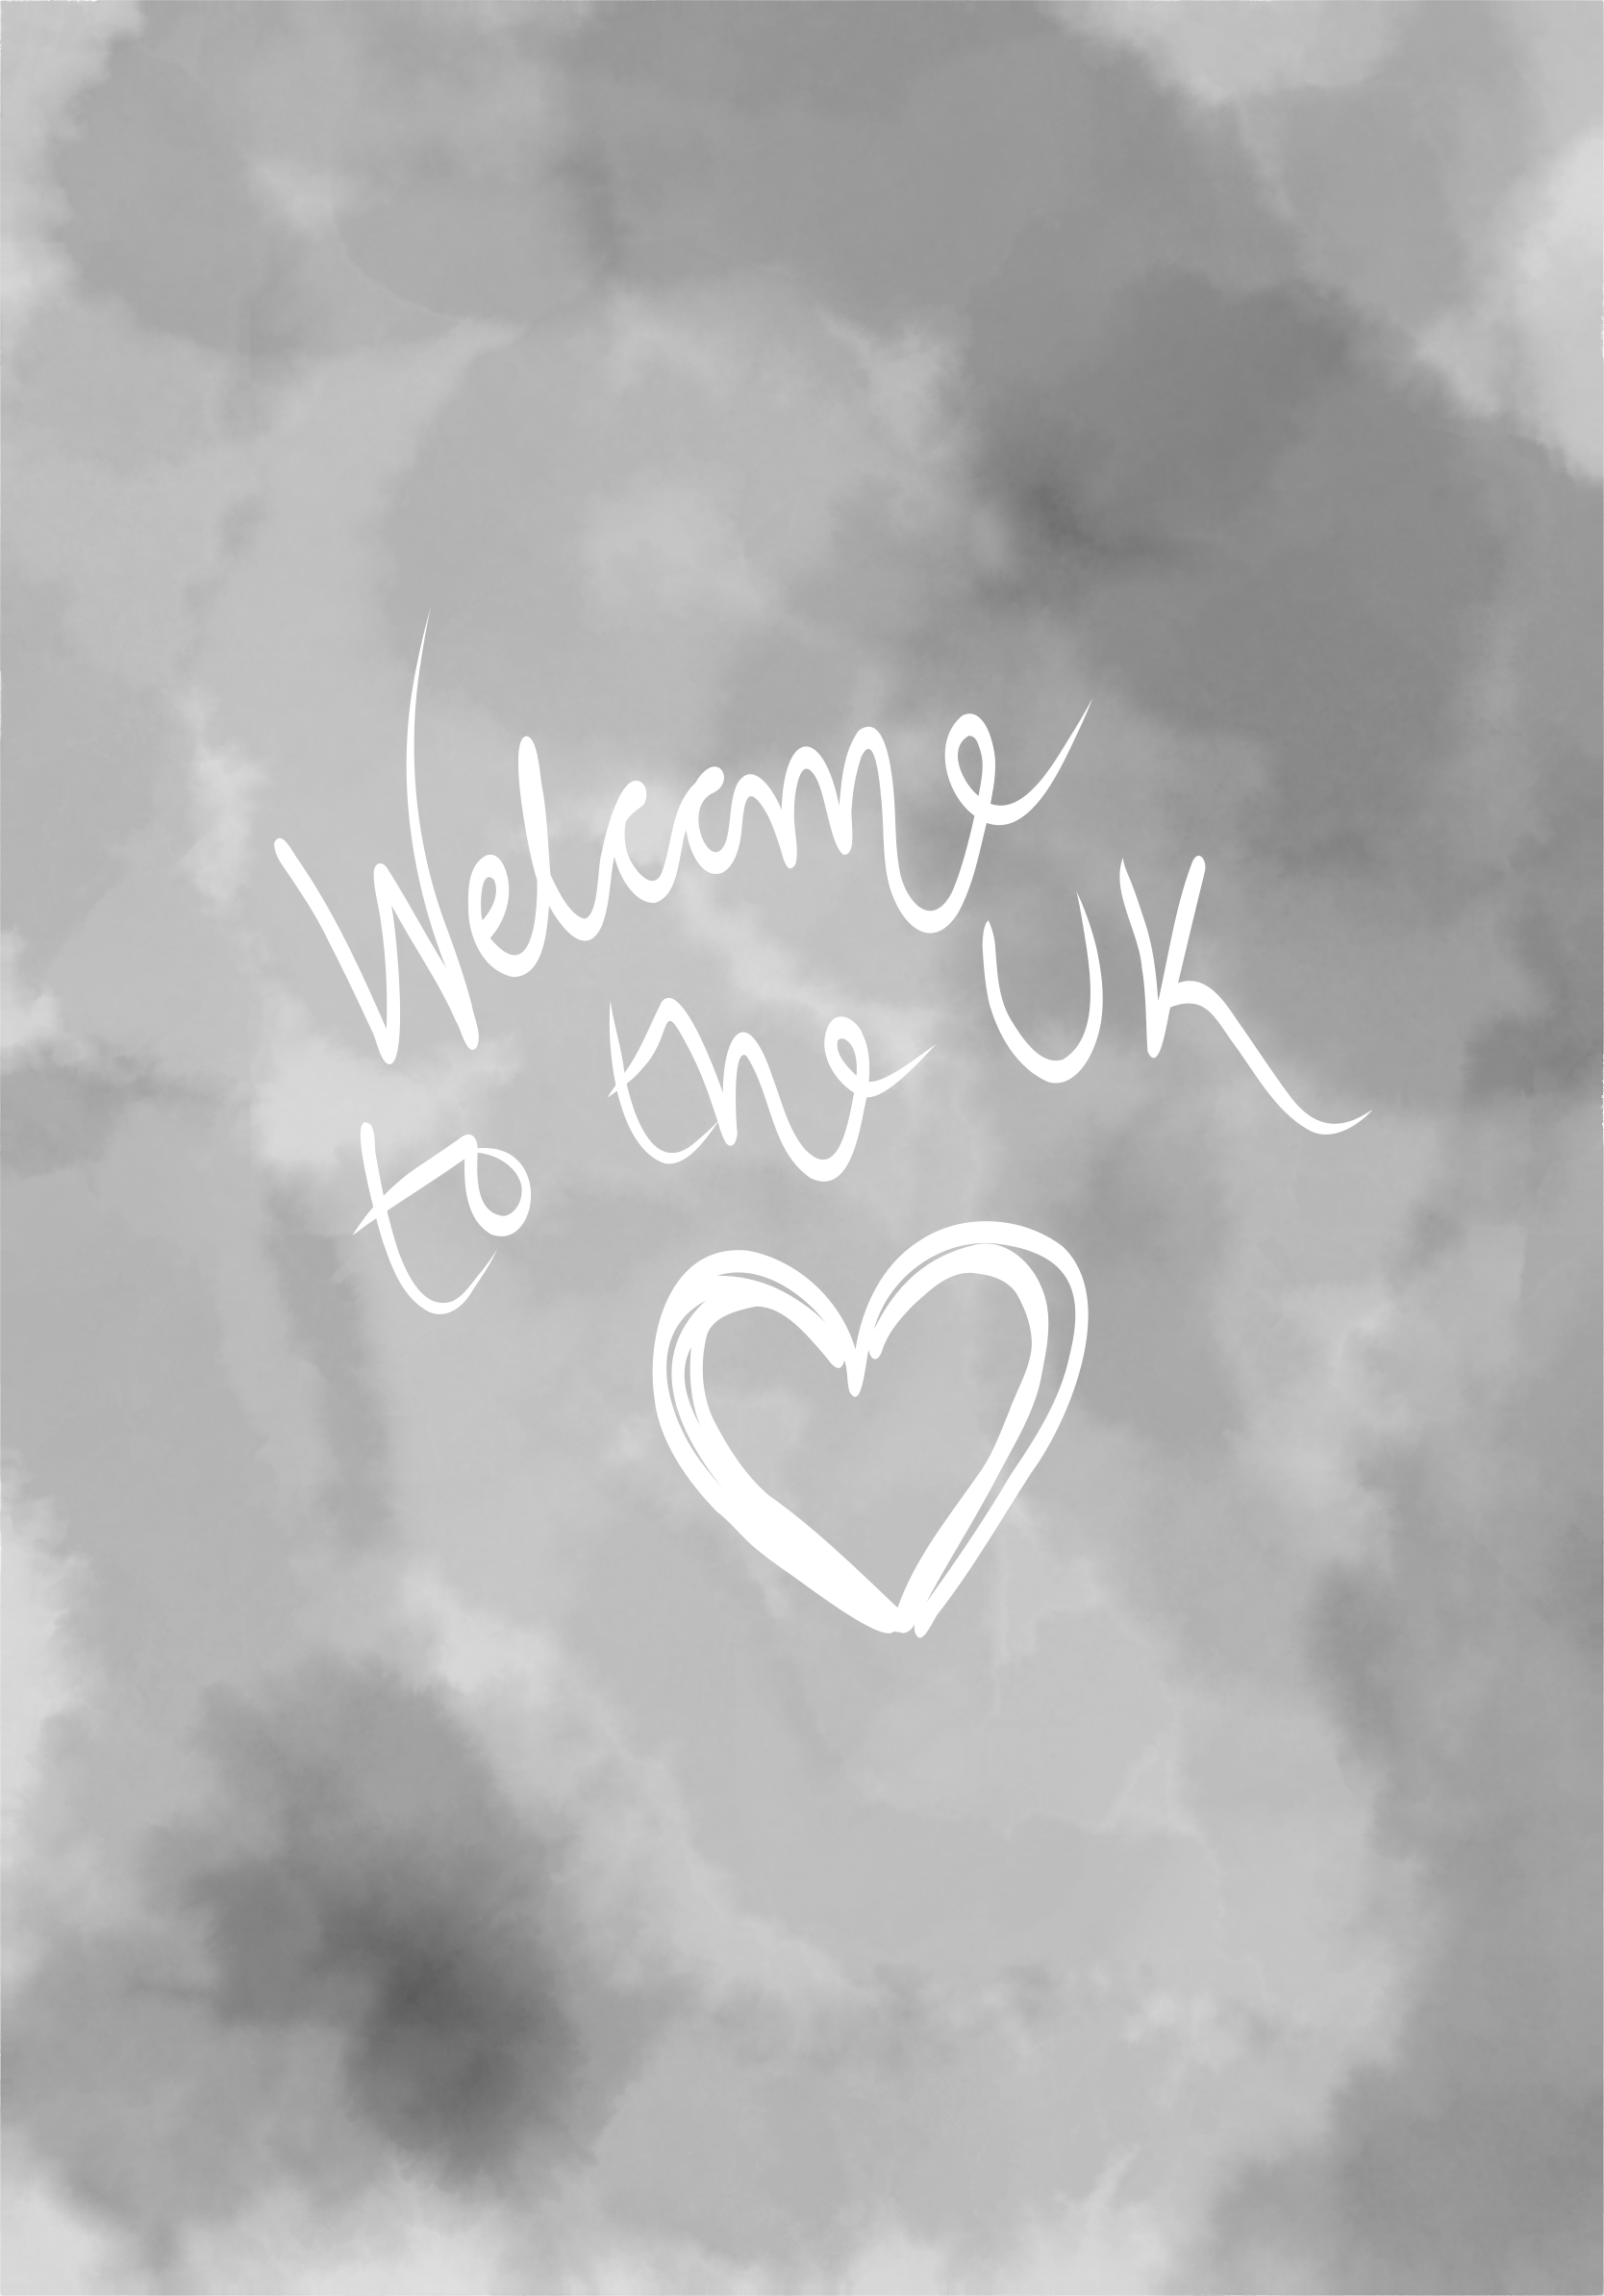 Welcome to the UK by Ahmad